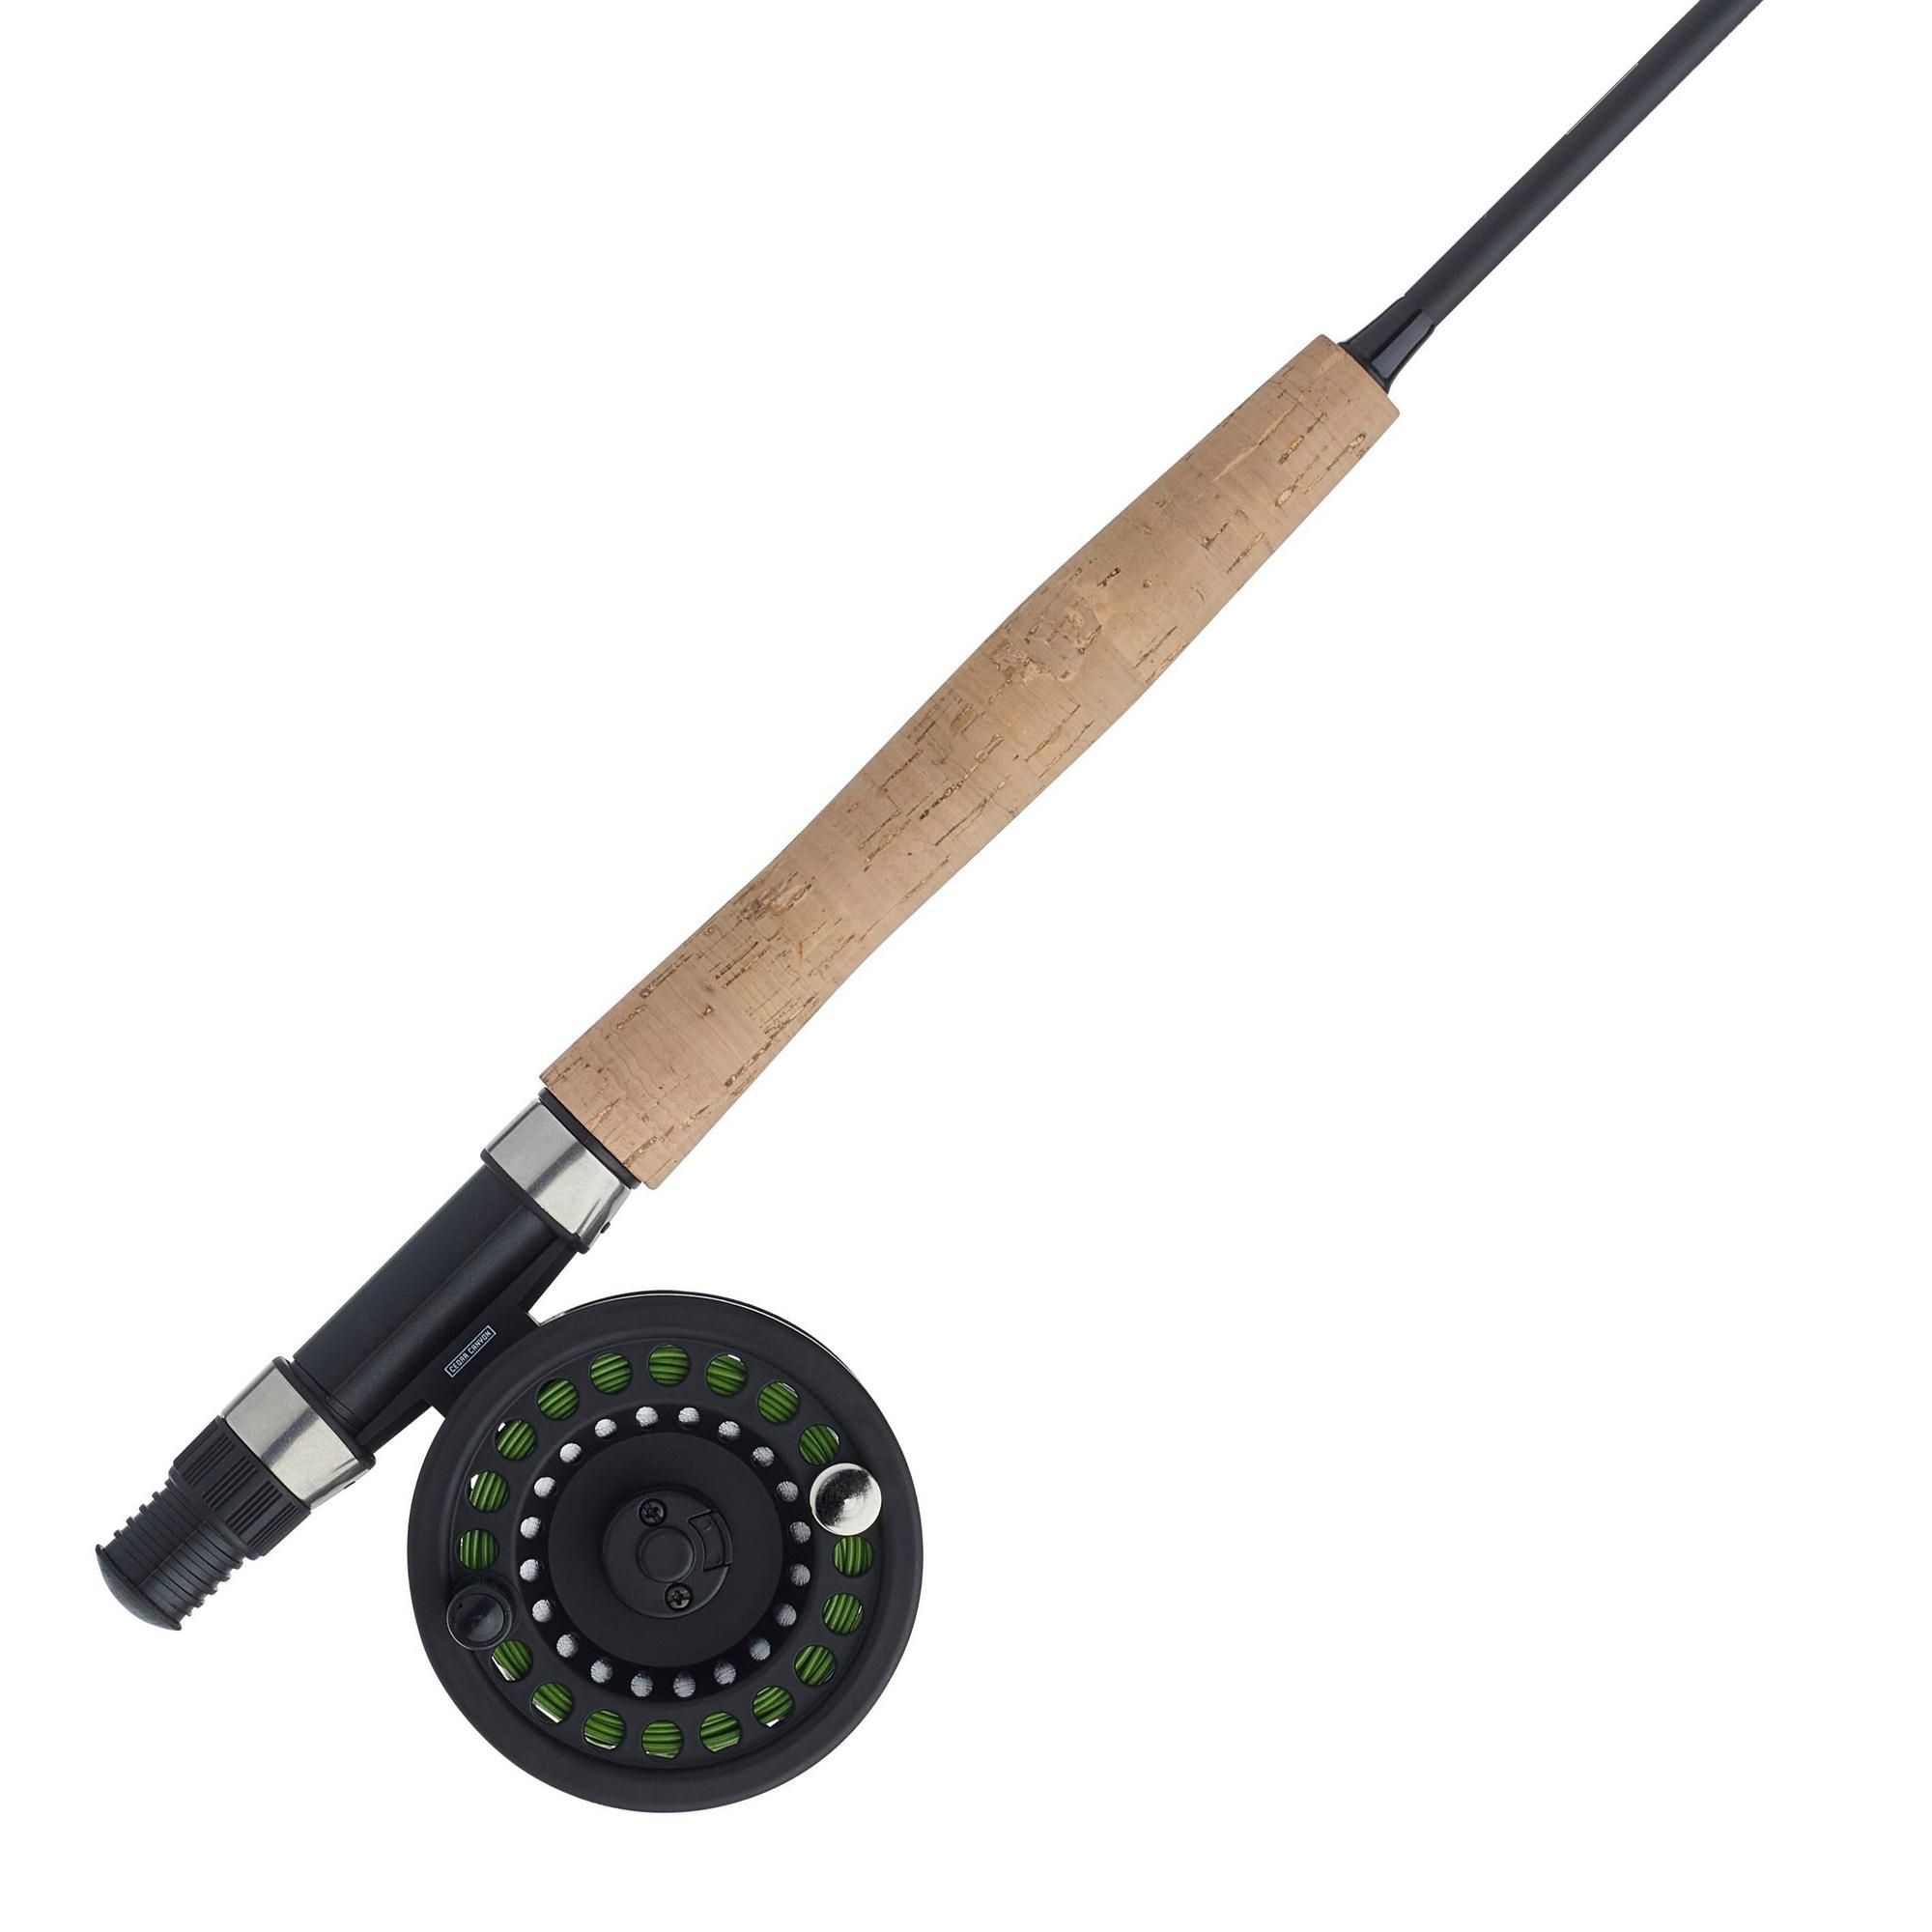 Shakespeare Barbie Spincasting Rod and Reel Combo with Backpack